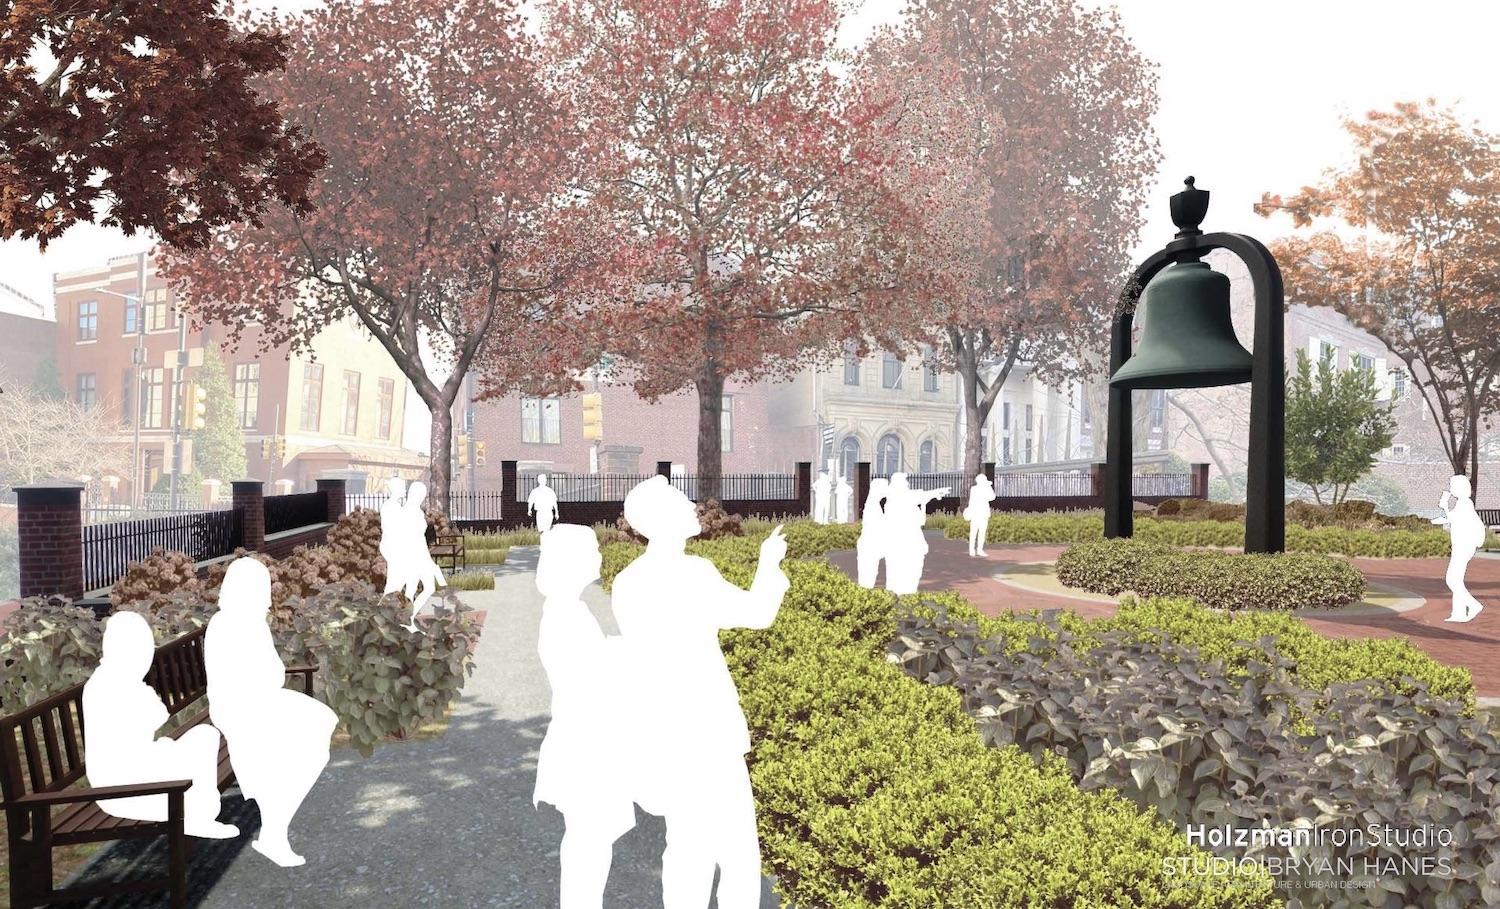 A rendering of how the Bicentennial Bell Garden will look in 2024 with the royal bell as a focal point.